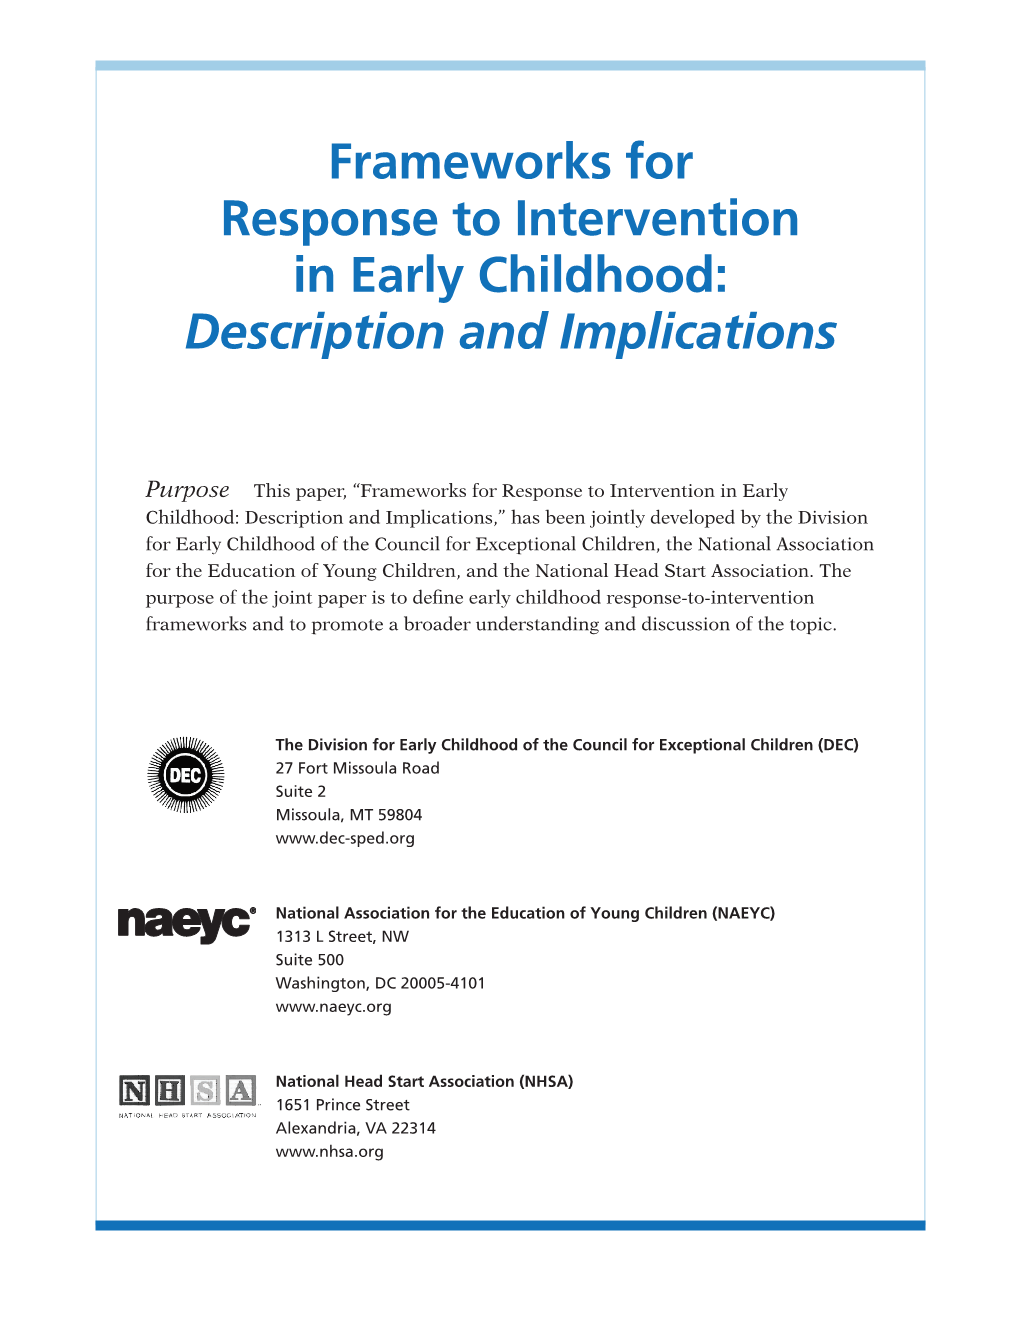 Frameworks for Response to Intervention in Early Childhood: Description and Implications